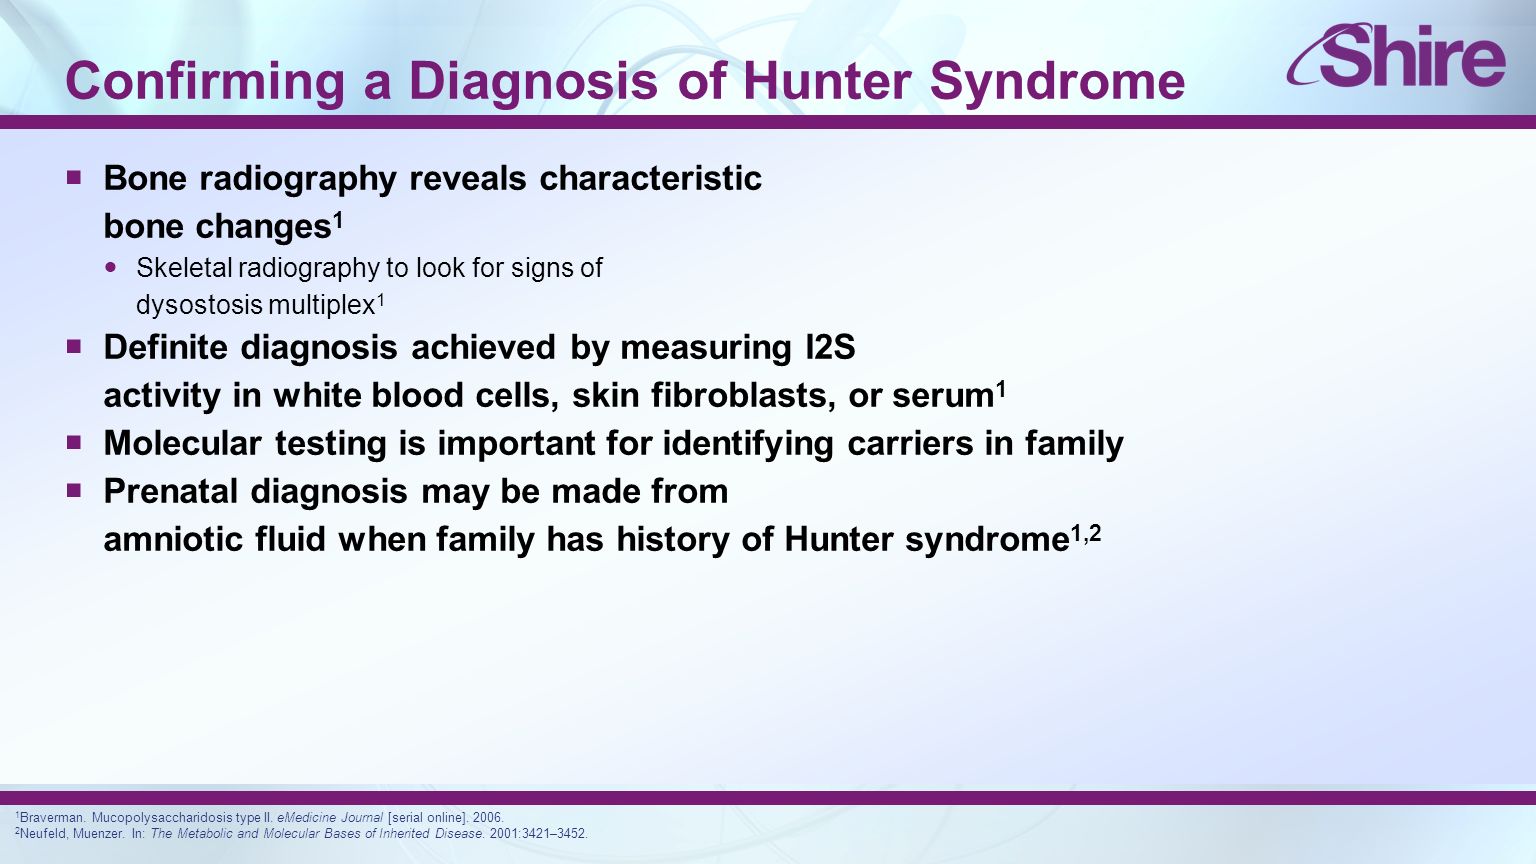 Confirming a Diagnosis of Hunter Syndrome  Bone radiography reveals characteristic bone changes 1 Skeletal radiography to look for signs of dysostosis multiplex 1  Definite diagnosis achieved by measuring I2S activity in white blood cells, skin fibroblasts, or serum 1  Molecular testing is important for identifying carriers in family  Prenatal diagnosis may be made from amniotic fluid when family has history of Hunter syndrome 1,2 1 Braverman.